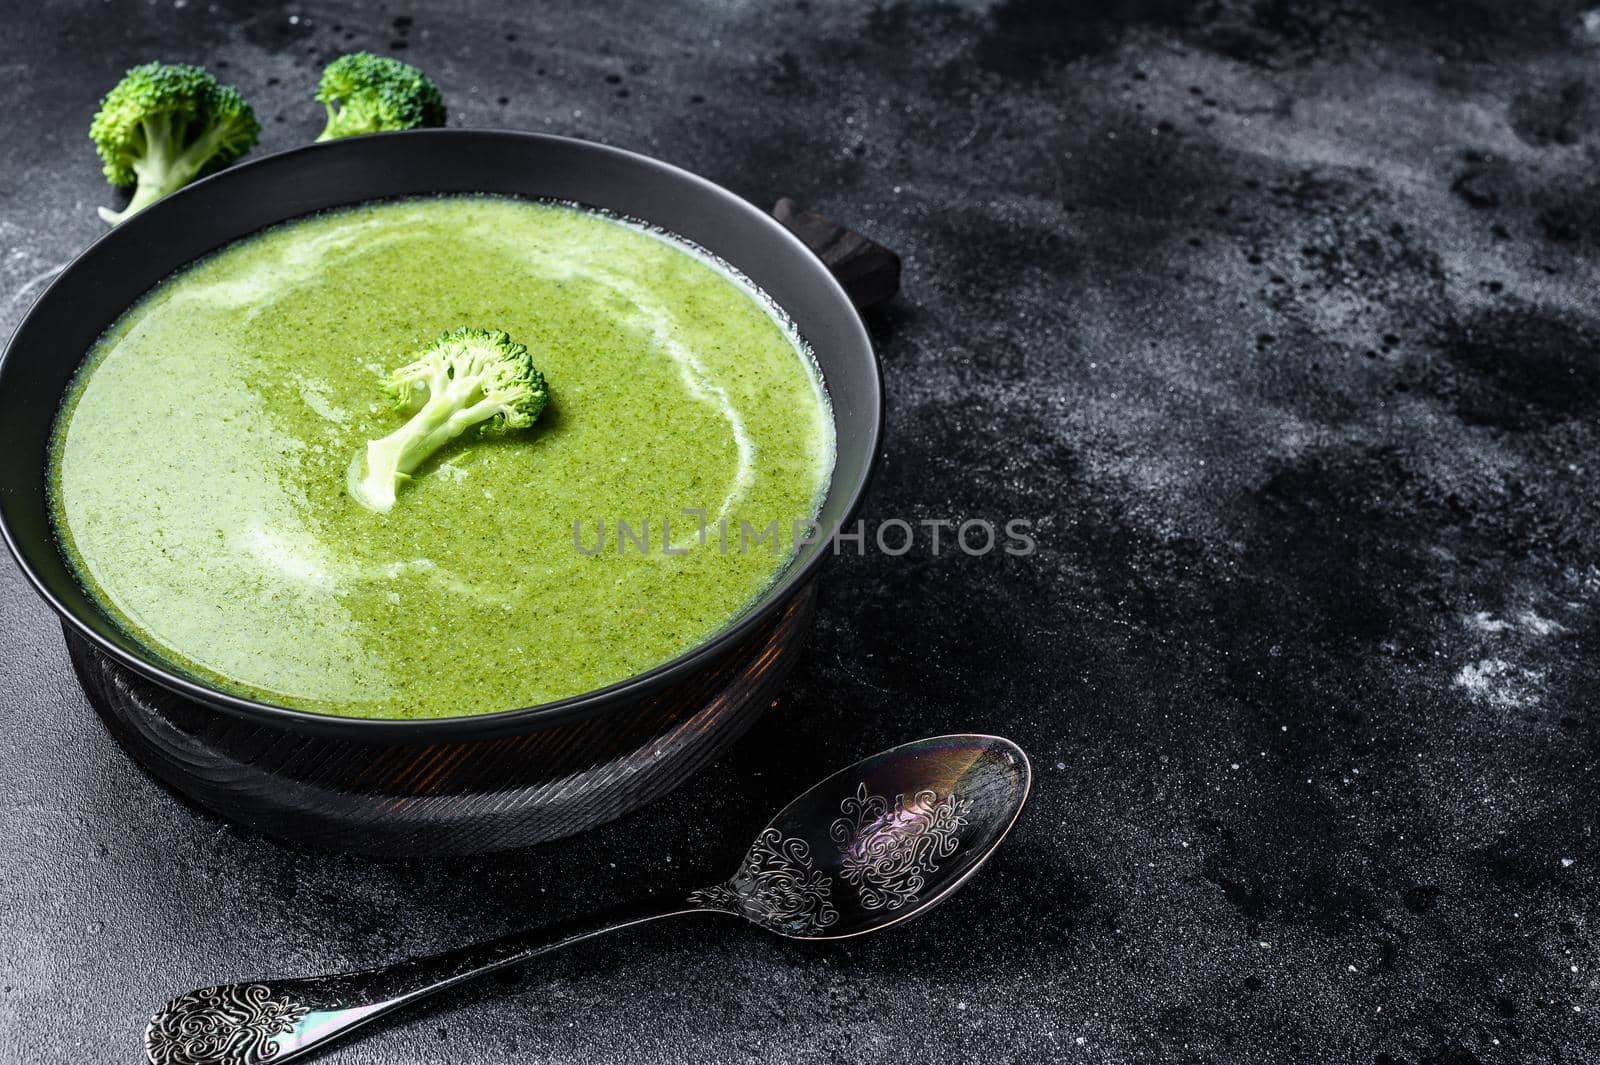 Fresh cream broccoli and pea soup in plate . Black background. Top view. Copy space.